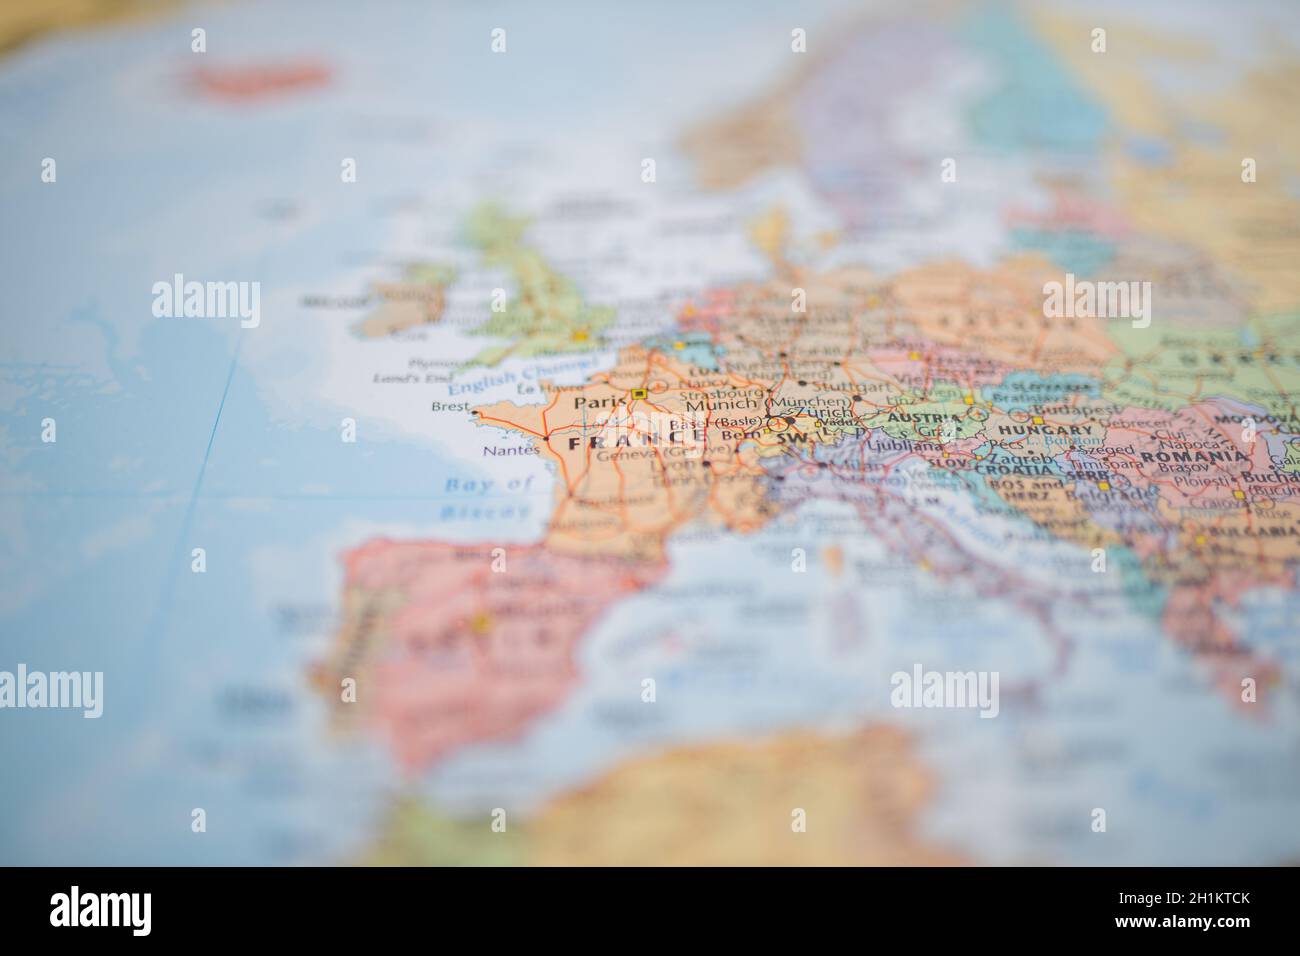 Picture of The Country of France on a Colorful and Blurry European Map Stock Photo